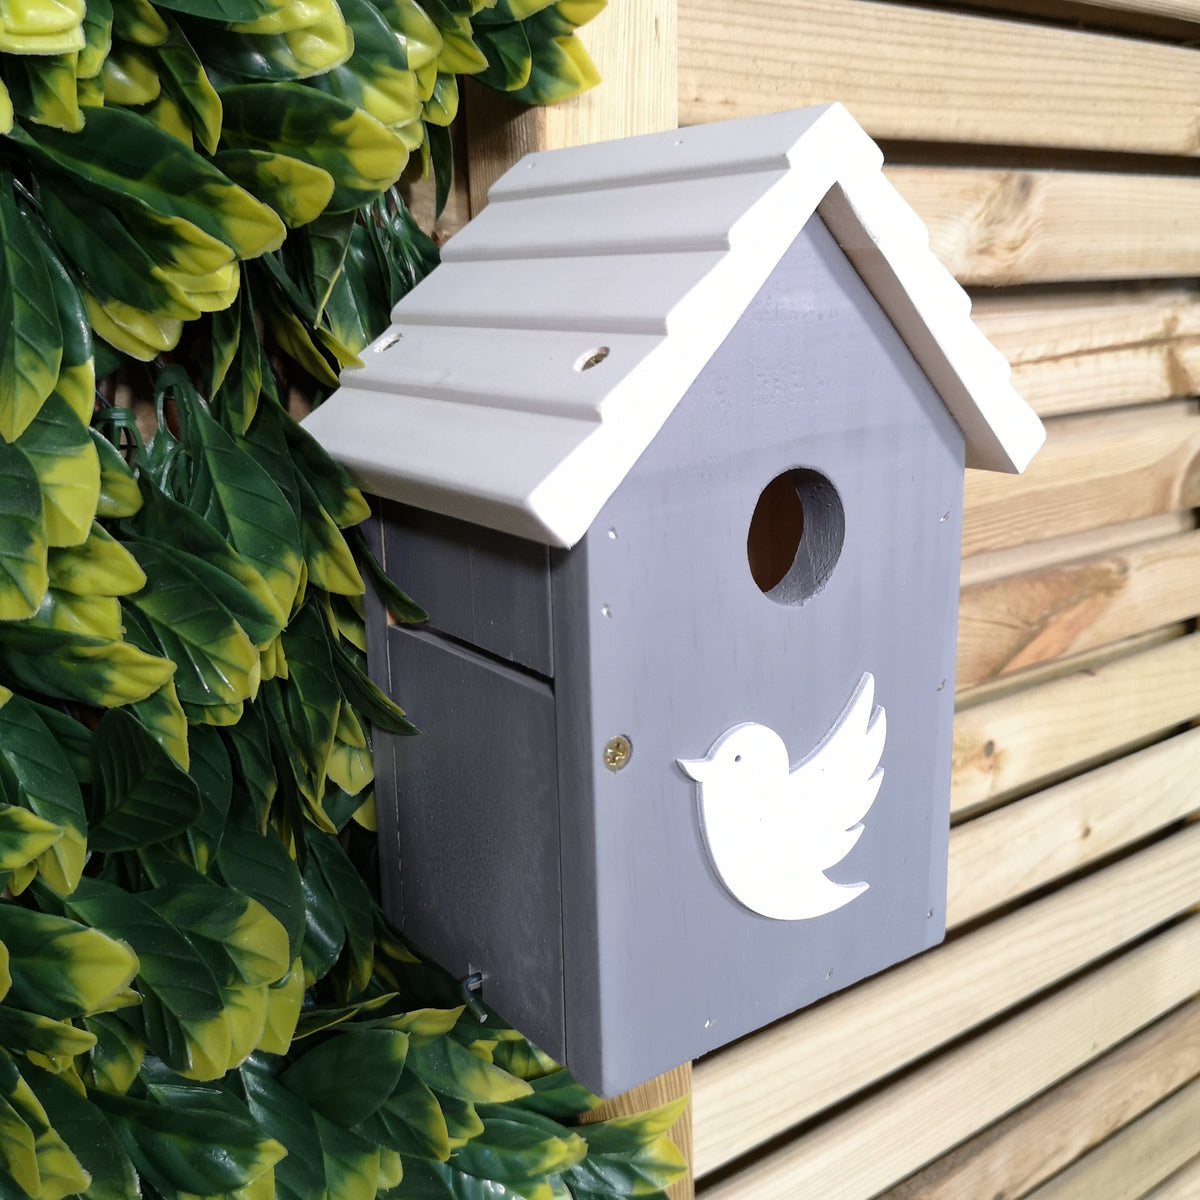 Wooden Peace Garden Wild Bird Nest Box with White Roof-32mm Entrance Hole